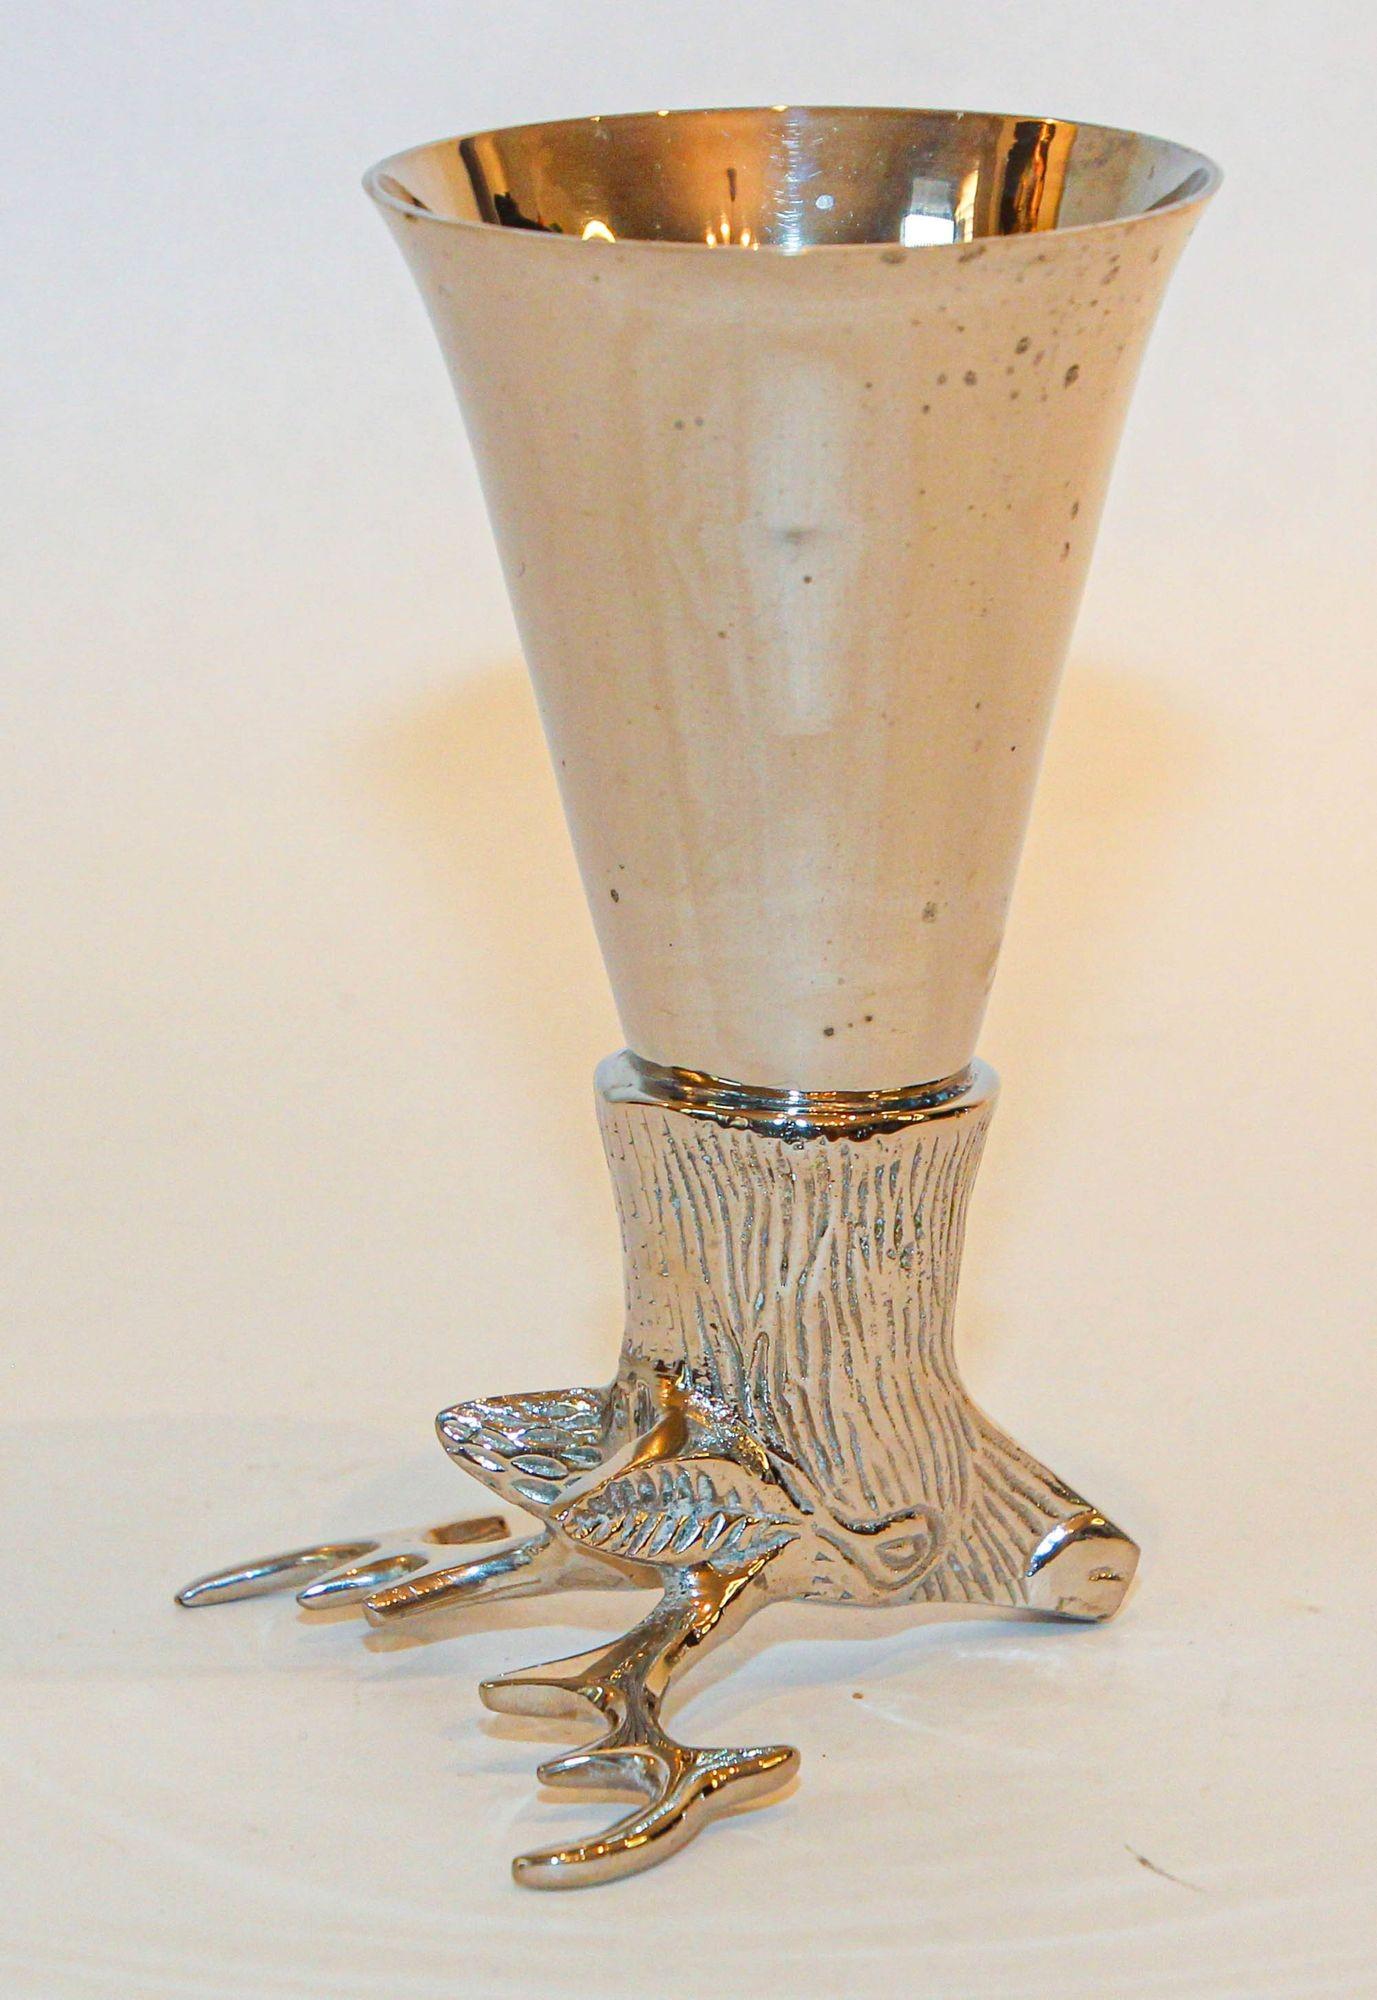 Stag Elk Silver Stirrup Cup Goblet Hunting Equestrian Barware Decor 1970s For Sale 6